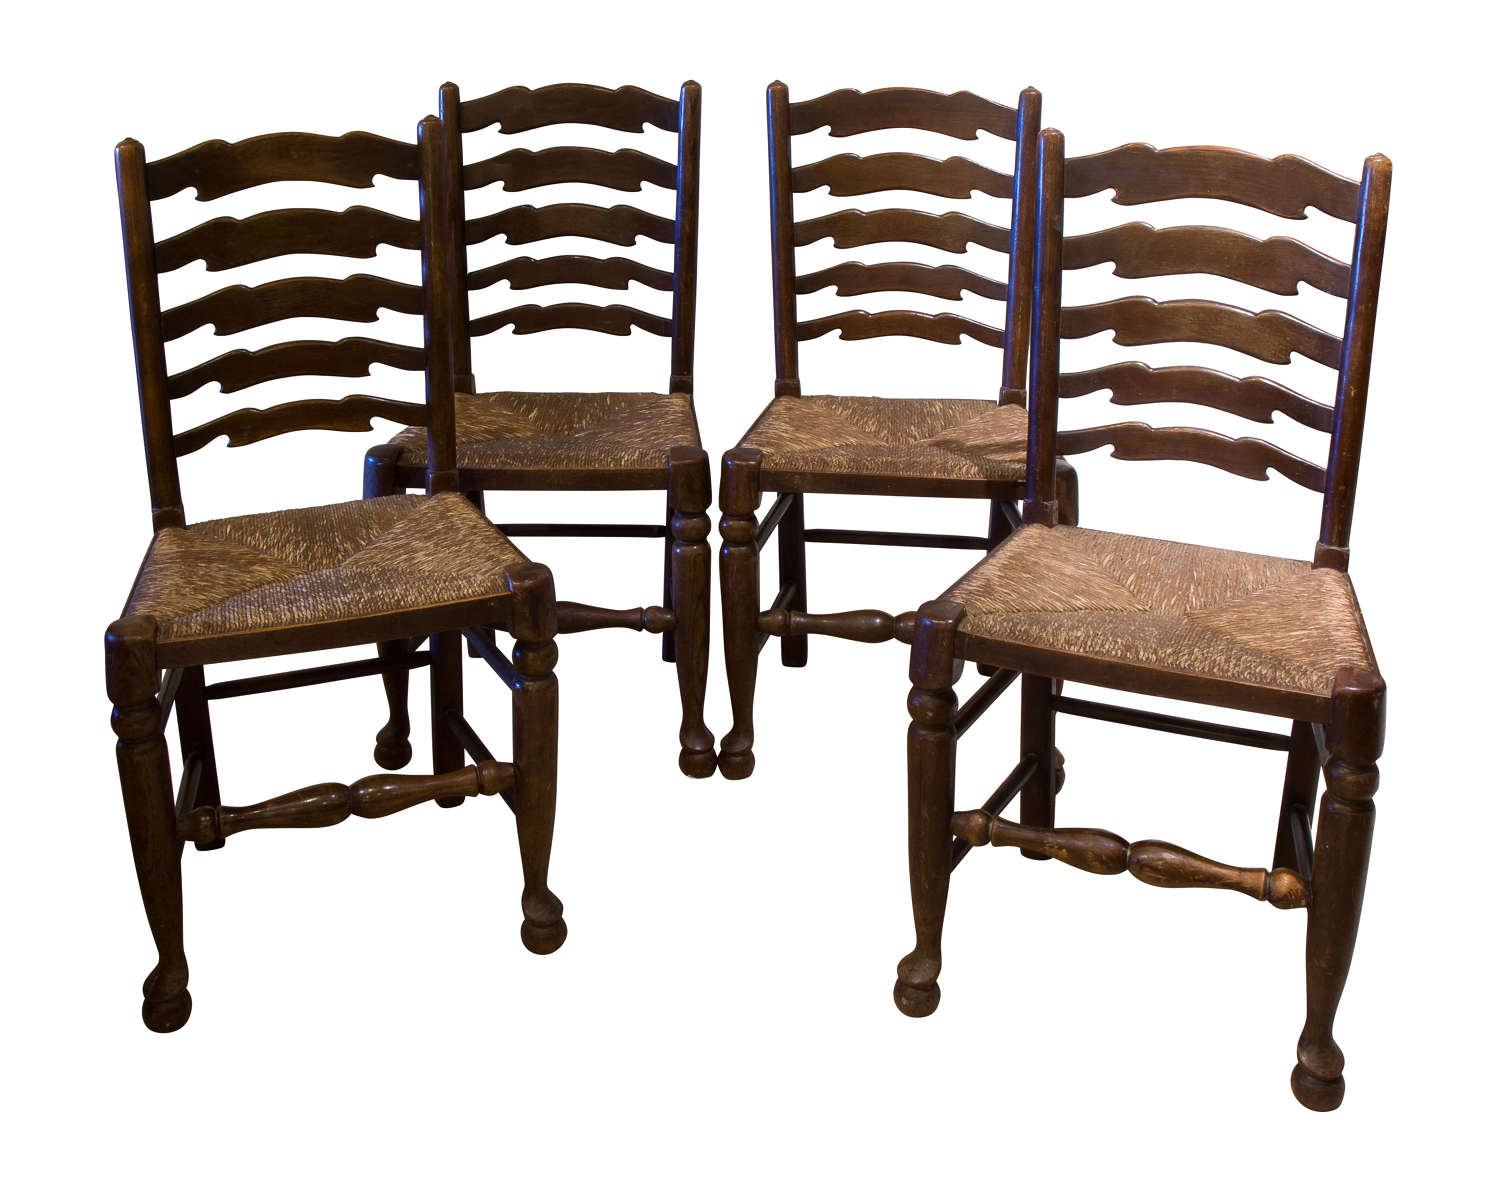 Set of 4 country ladderback chairs circa 1920